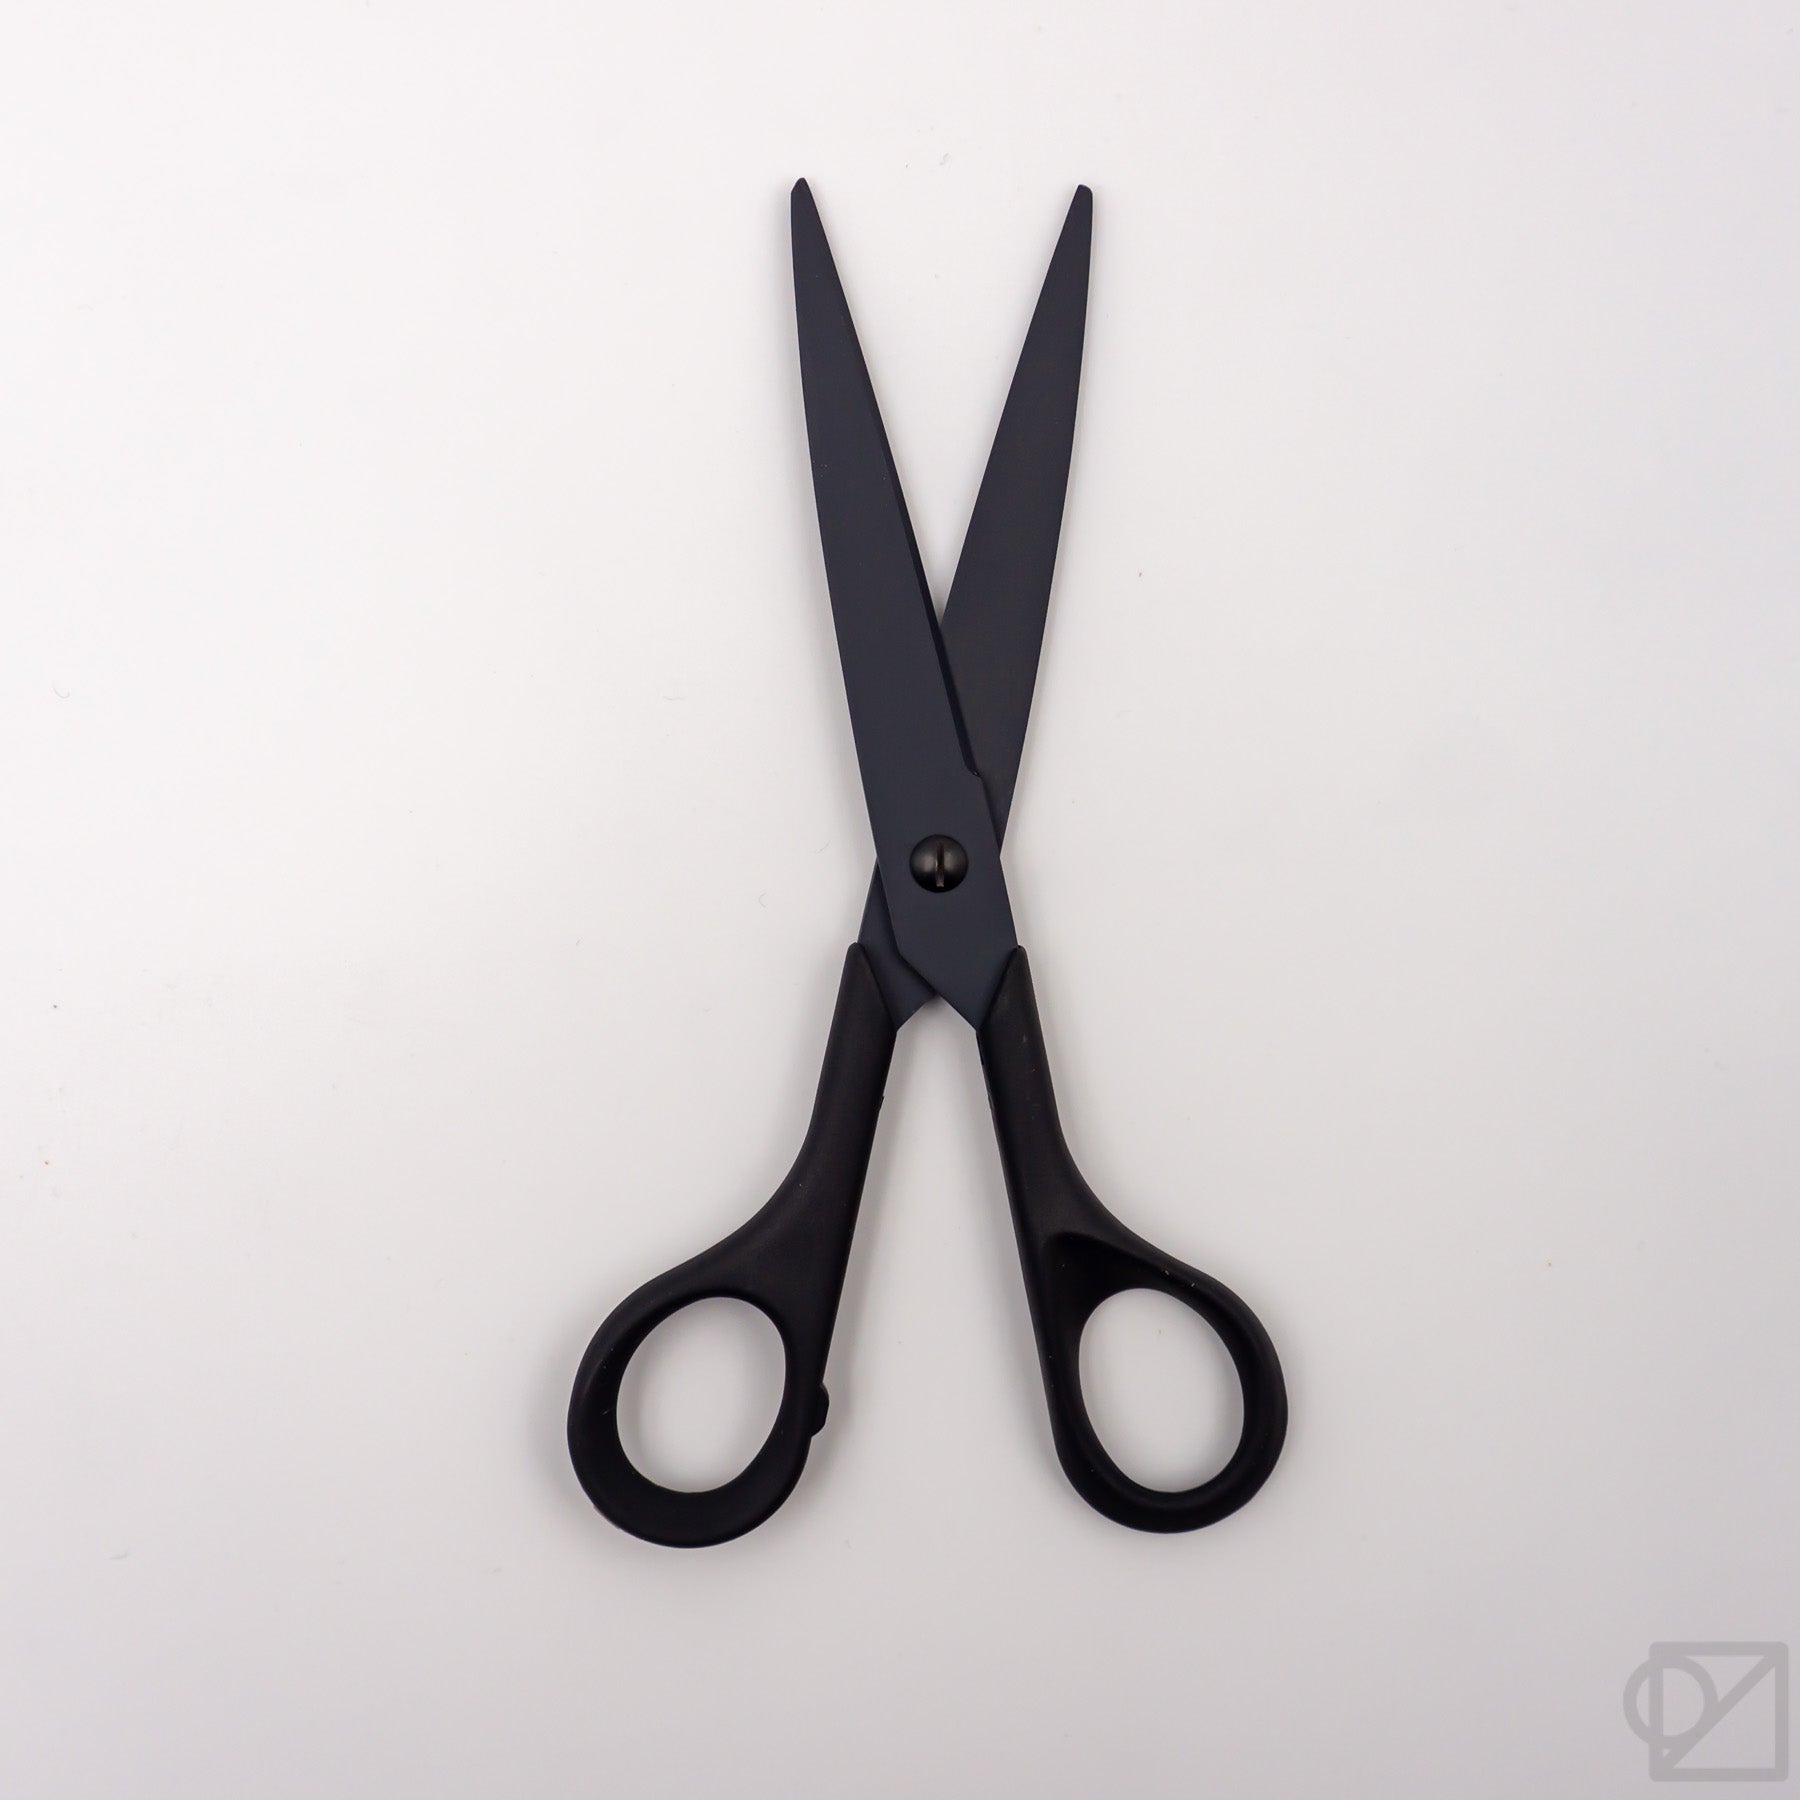  ALLEX Perfect Barrier Coated Non-Sticking Straight Office  Scissors : Arts, Crafts & Sewing